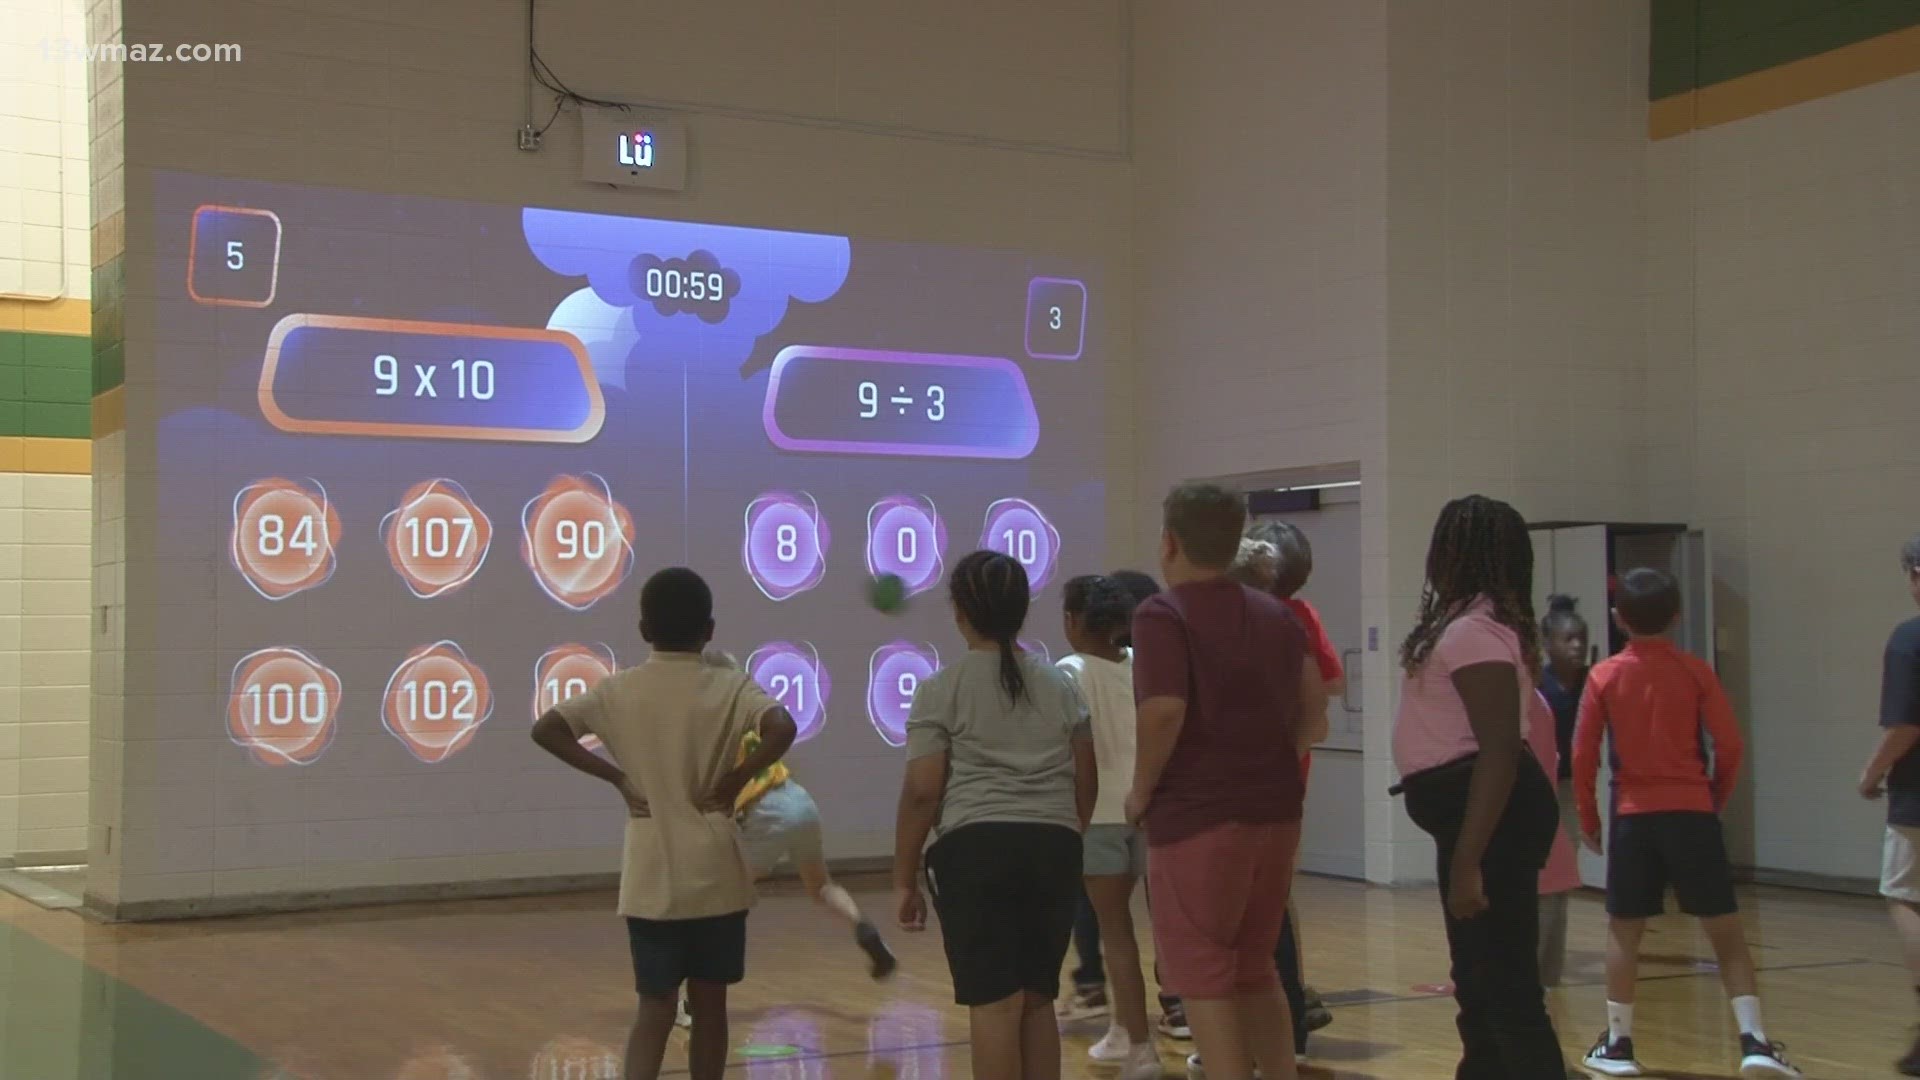 The interactive learning games combine education, fun and fitness. Here's what they look like.